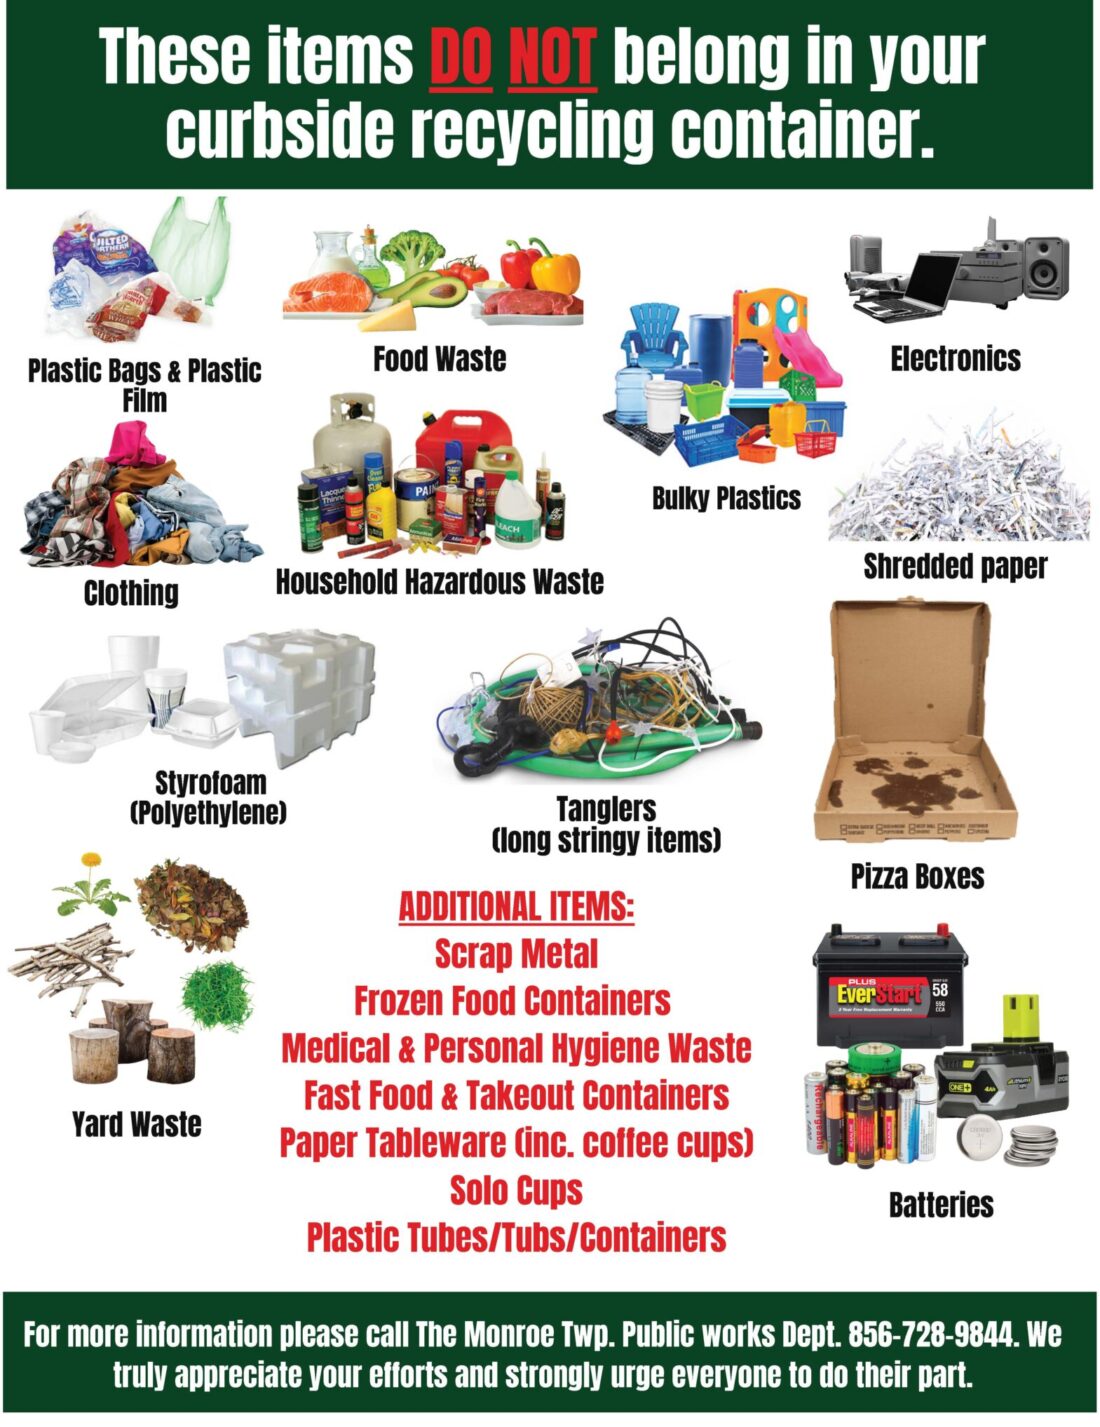 https://monroetownshipnj.org/3-2/public-works/recycling-101/these-items-do-not-belong-in-your-curbside-recycling-container-8_page_1/